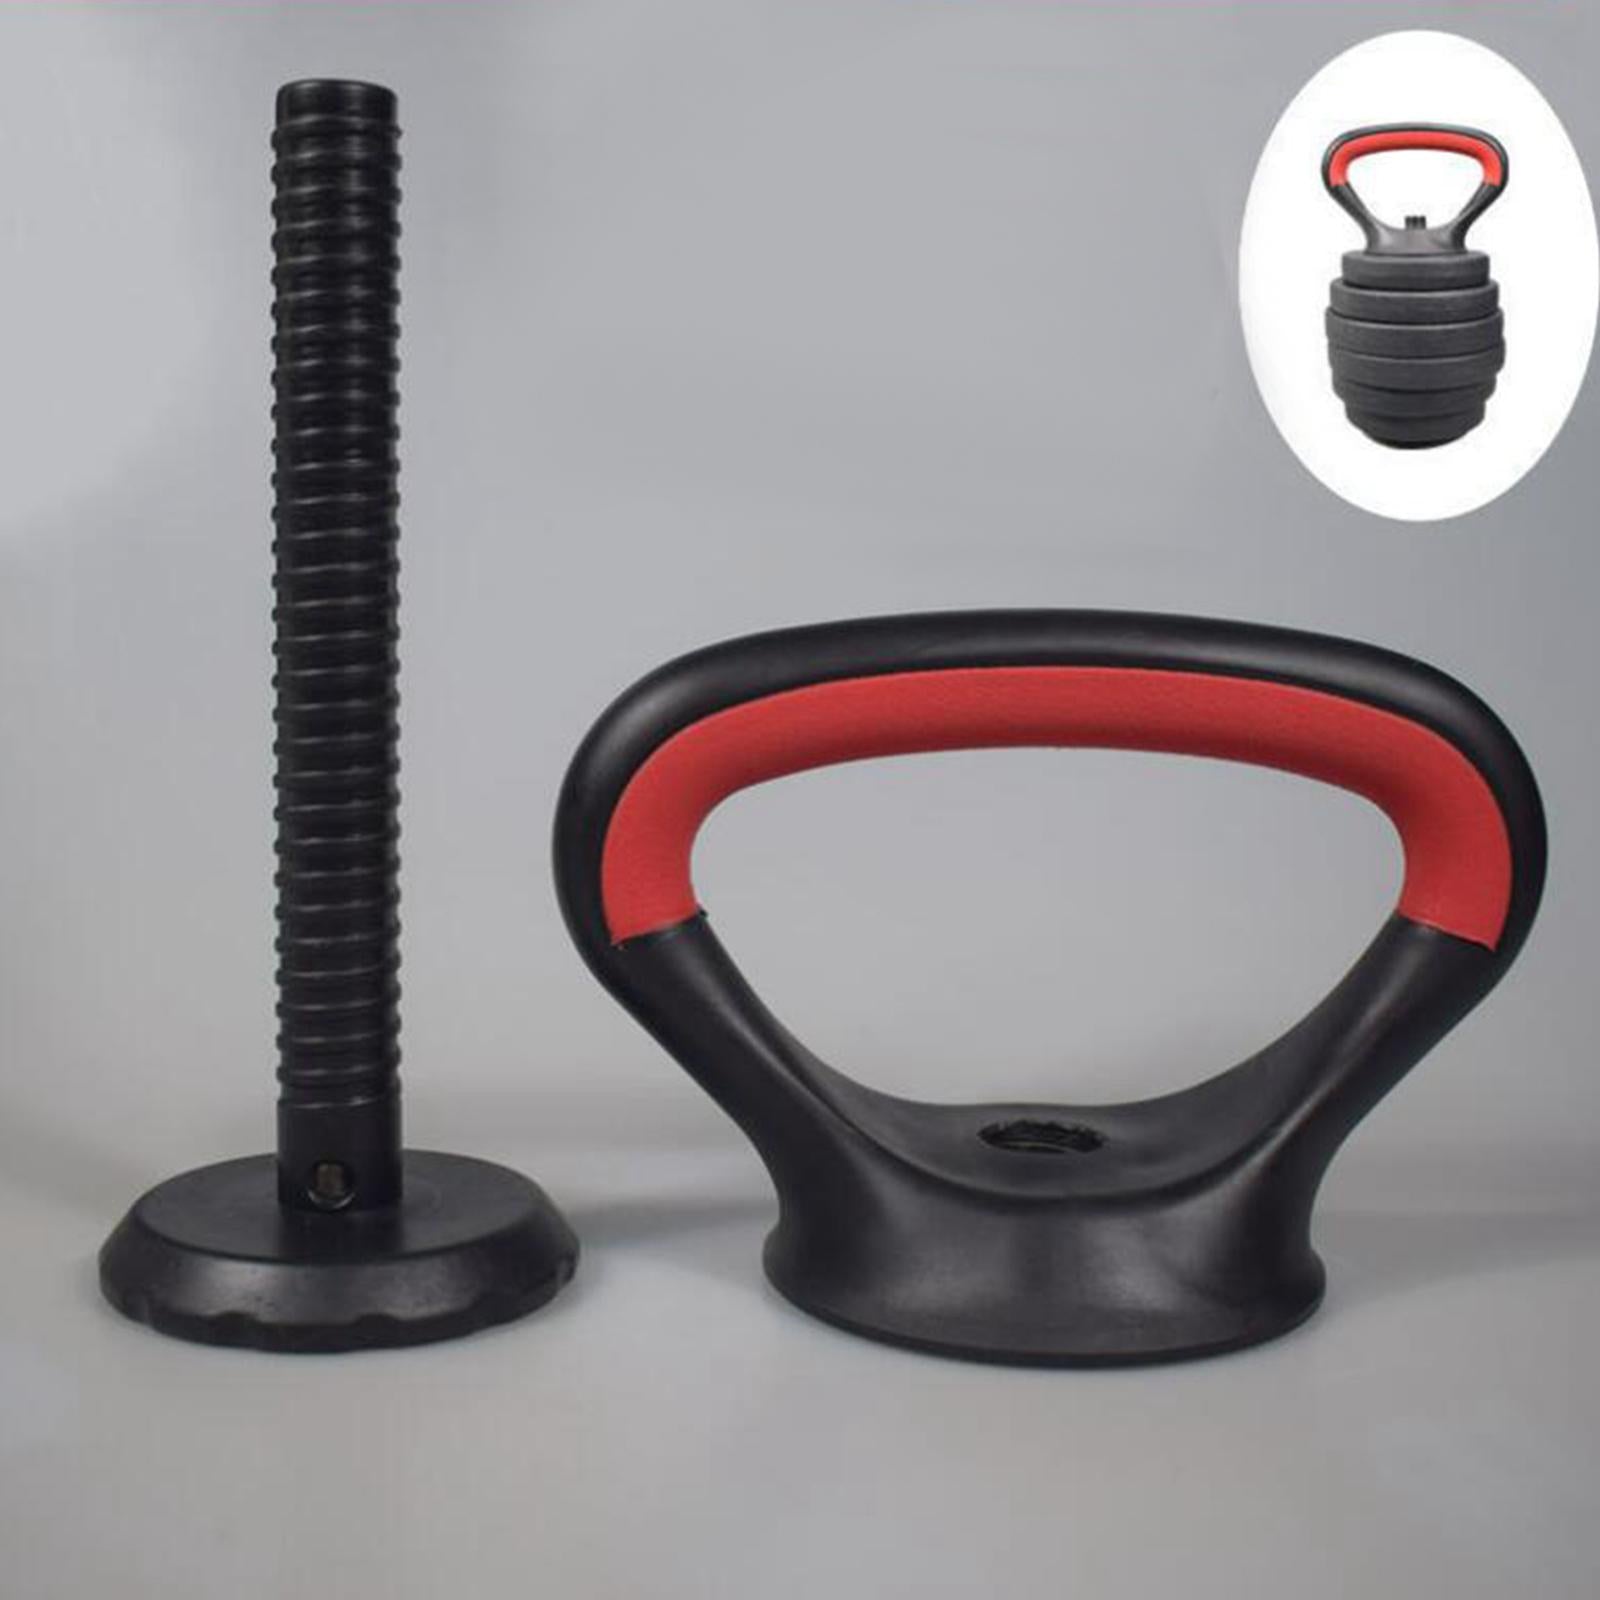 A black and red JB Muscle Adjustable Kettlebell Handle: Dynamic Arm Strength Training with a red handle.